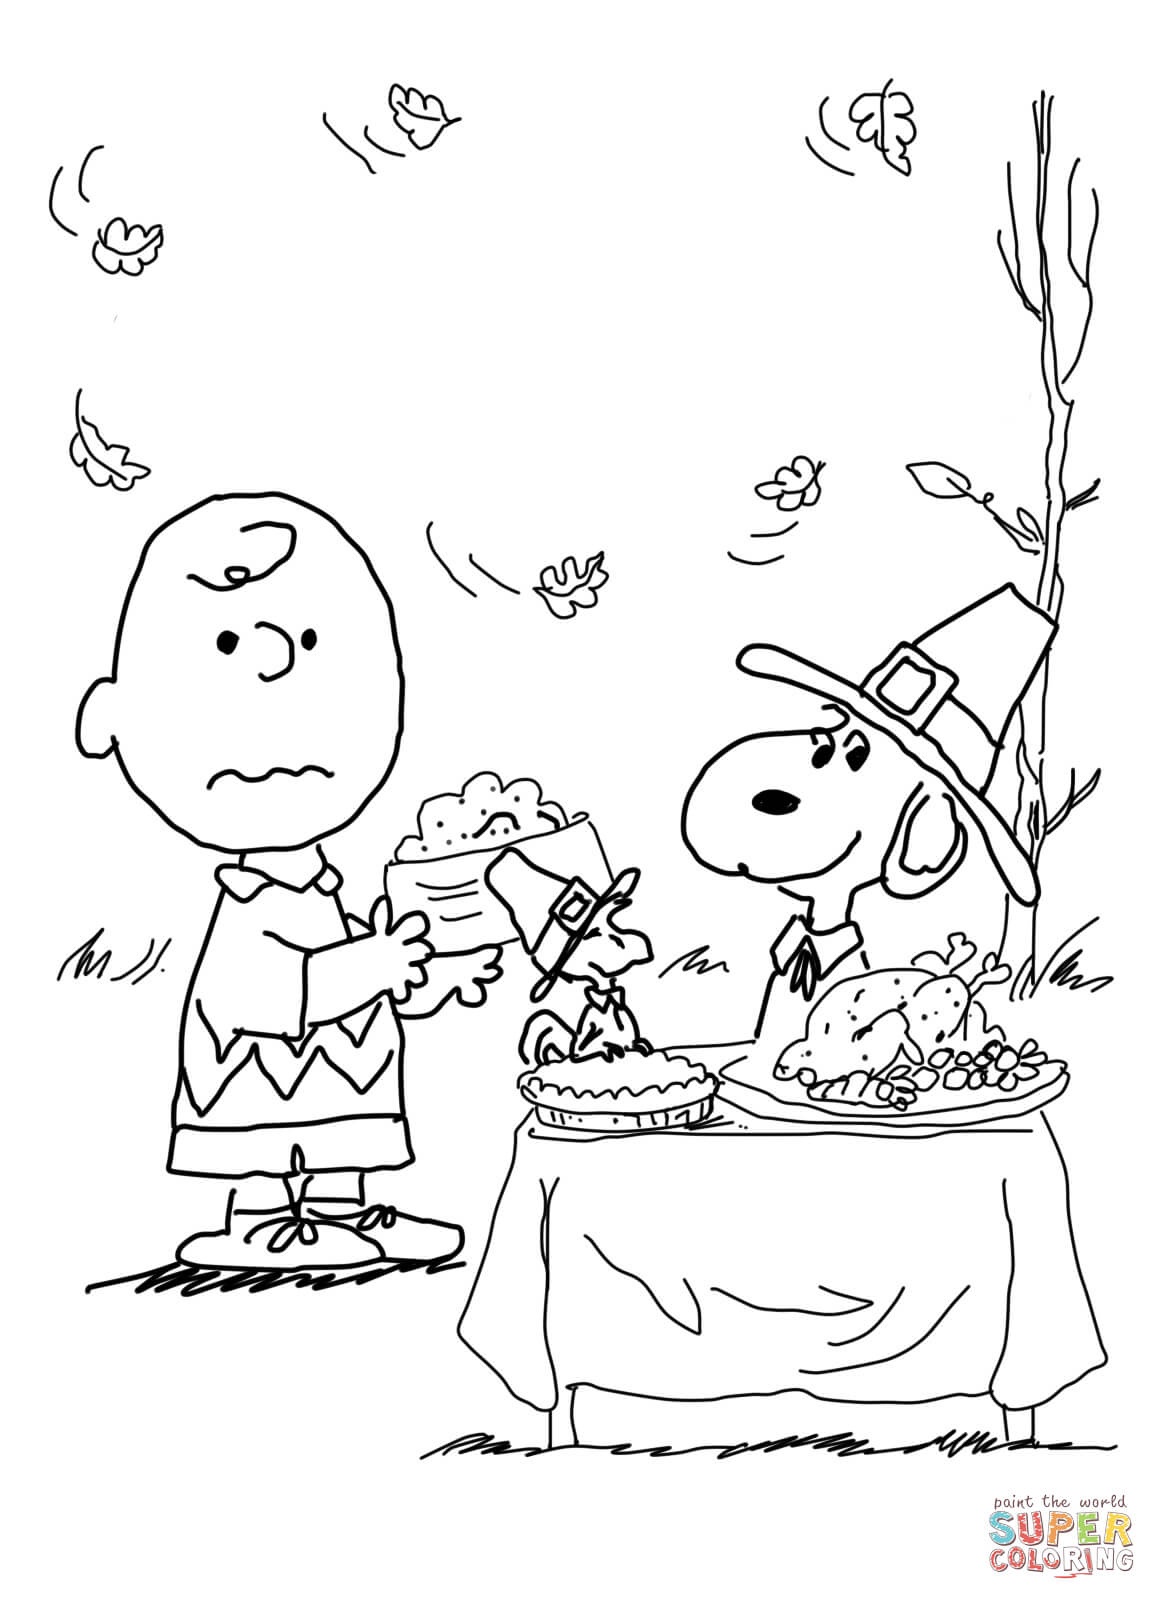 Charlie Brown Thanksgiving Coloring Page | Free Printable Coloring Pages - Free Printable Charlie Brown Halloween Coloring Pages